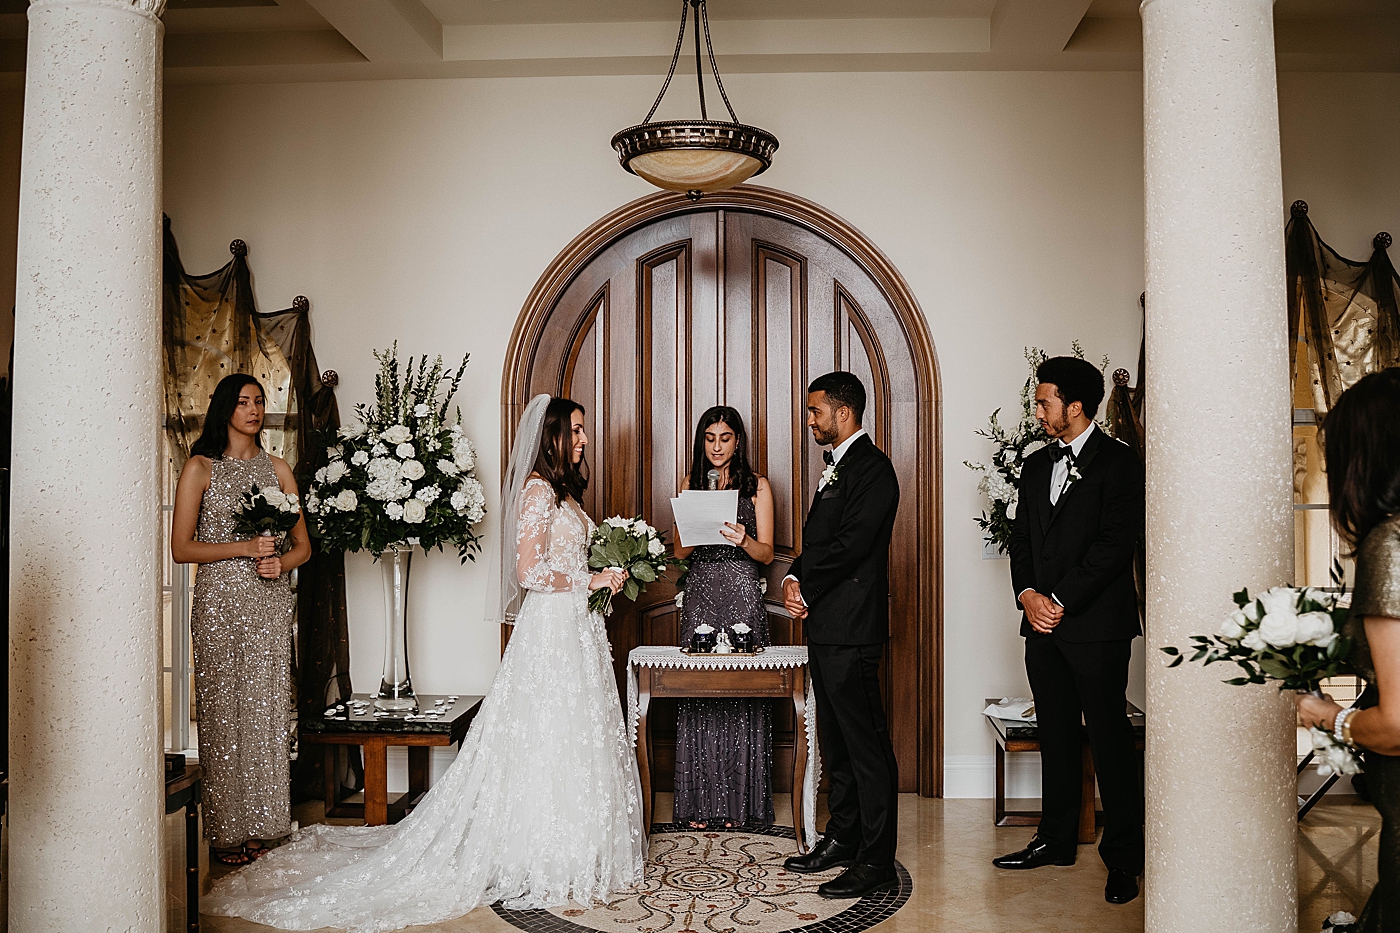 Ceremony homily indoor Intimate Home Wedding captured by South Florida Wedding Photographer Krystal Capone Photography